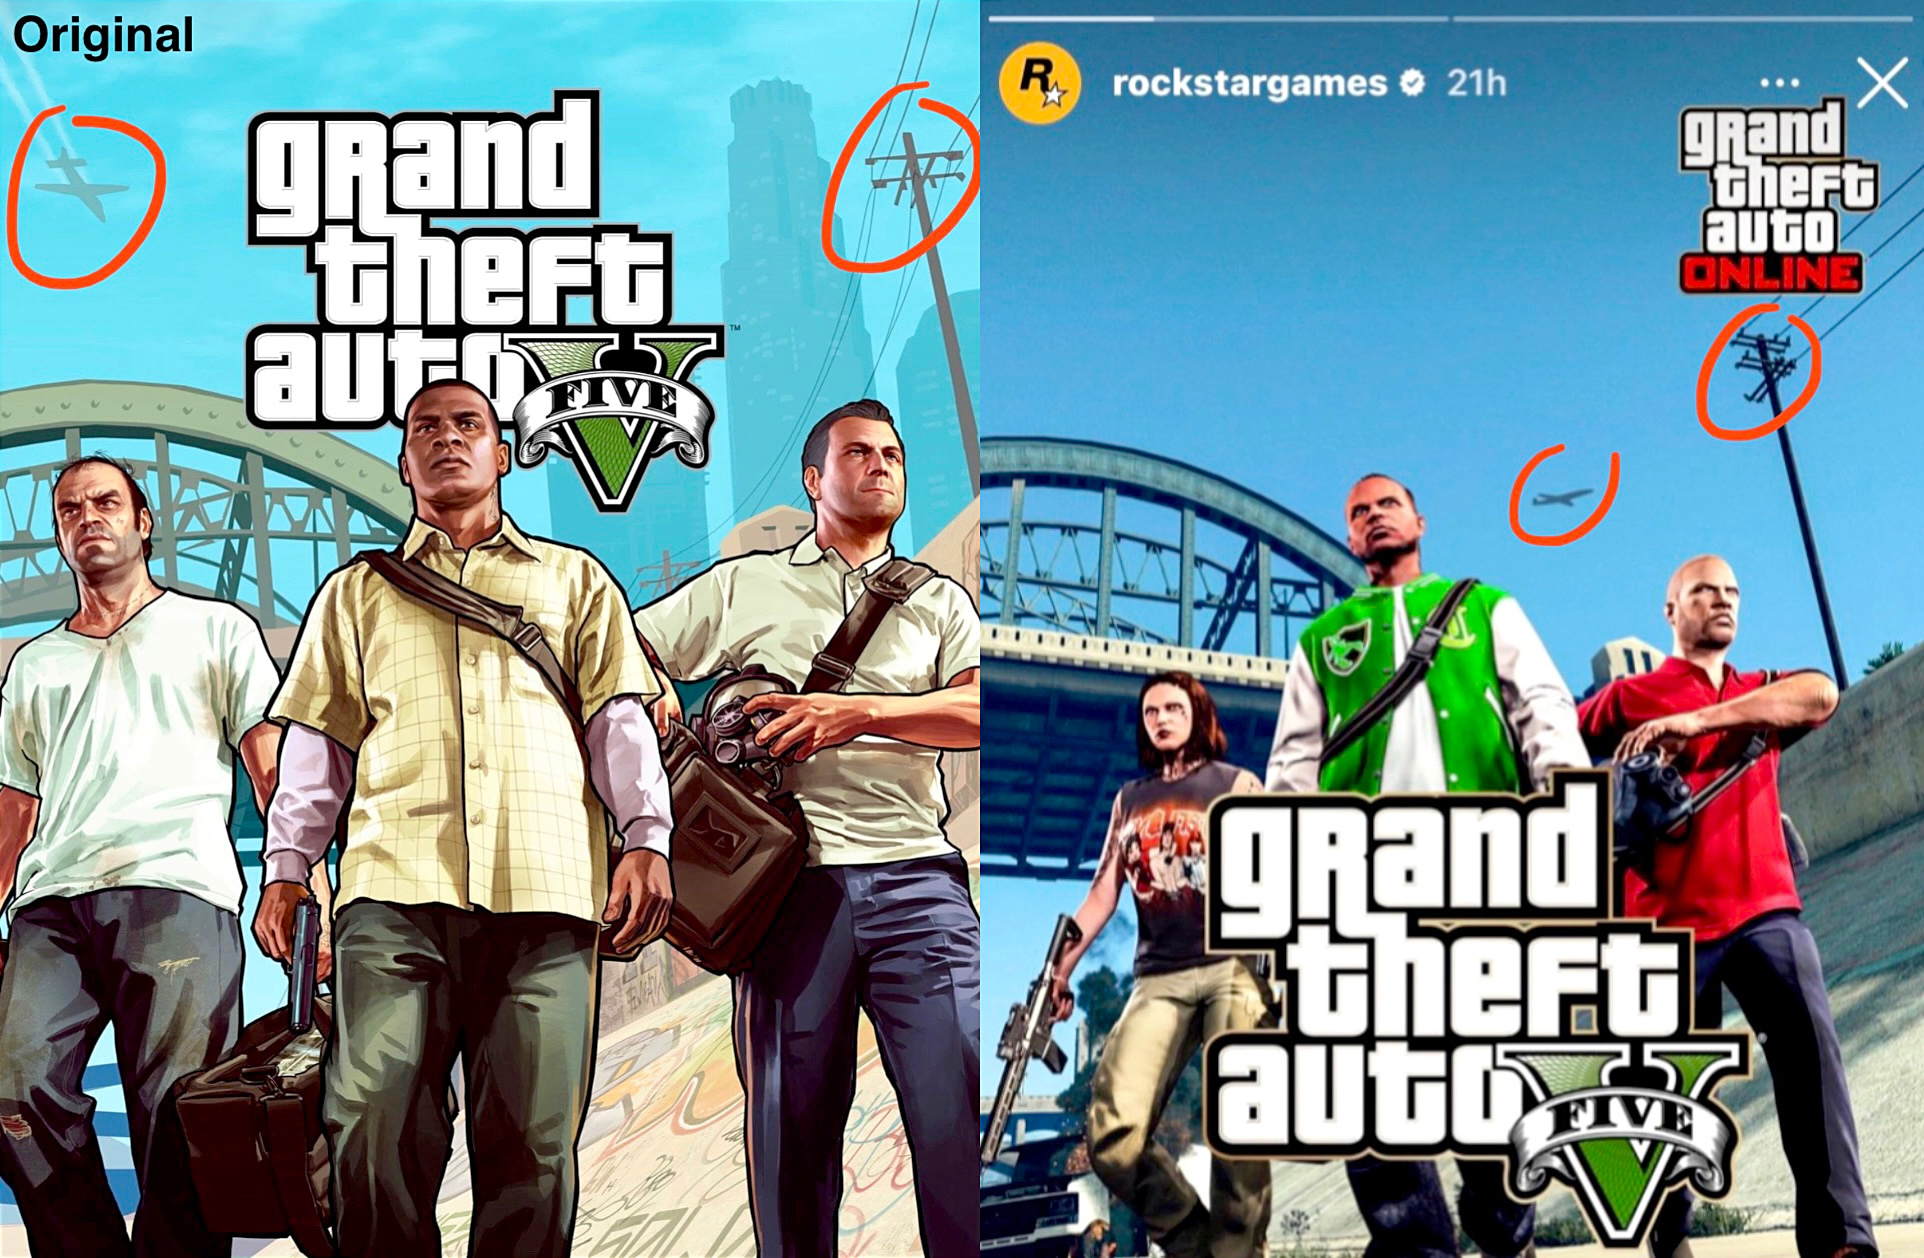 GTA 6 with a new teaser was noticed and impressed fans
Latest